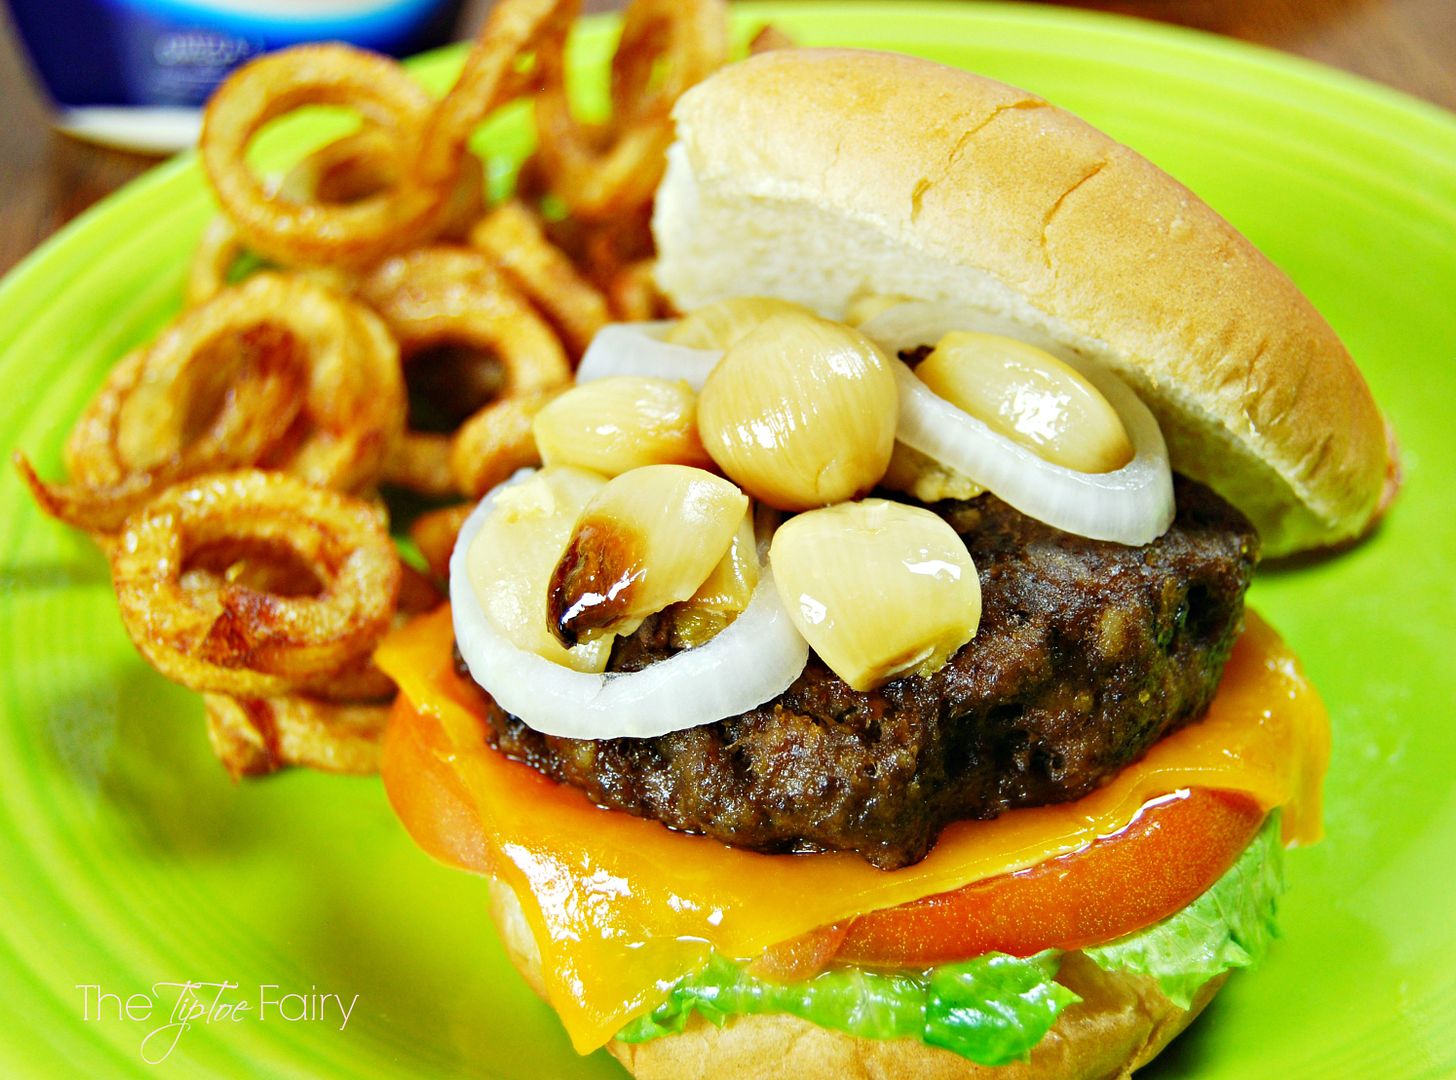 #Burgervention: Hellman's Best EVER Juicy Burger with Roasted Garlic | The TipToe Fairy